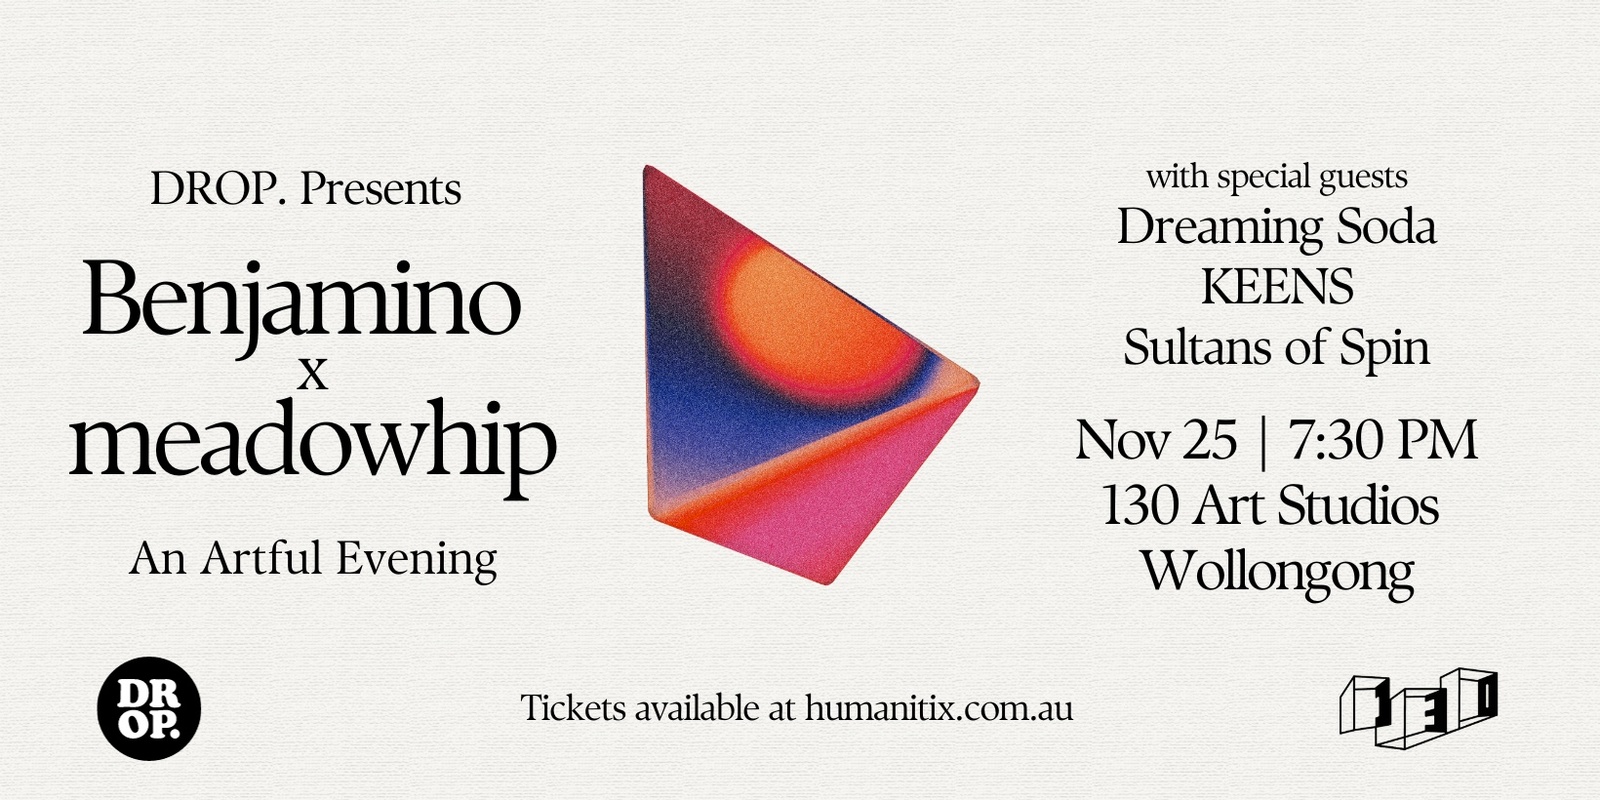 Banner image for DROP. Presents: An Artful Evening with Benjamino x meadowhip